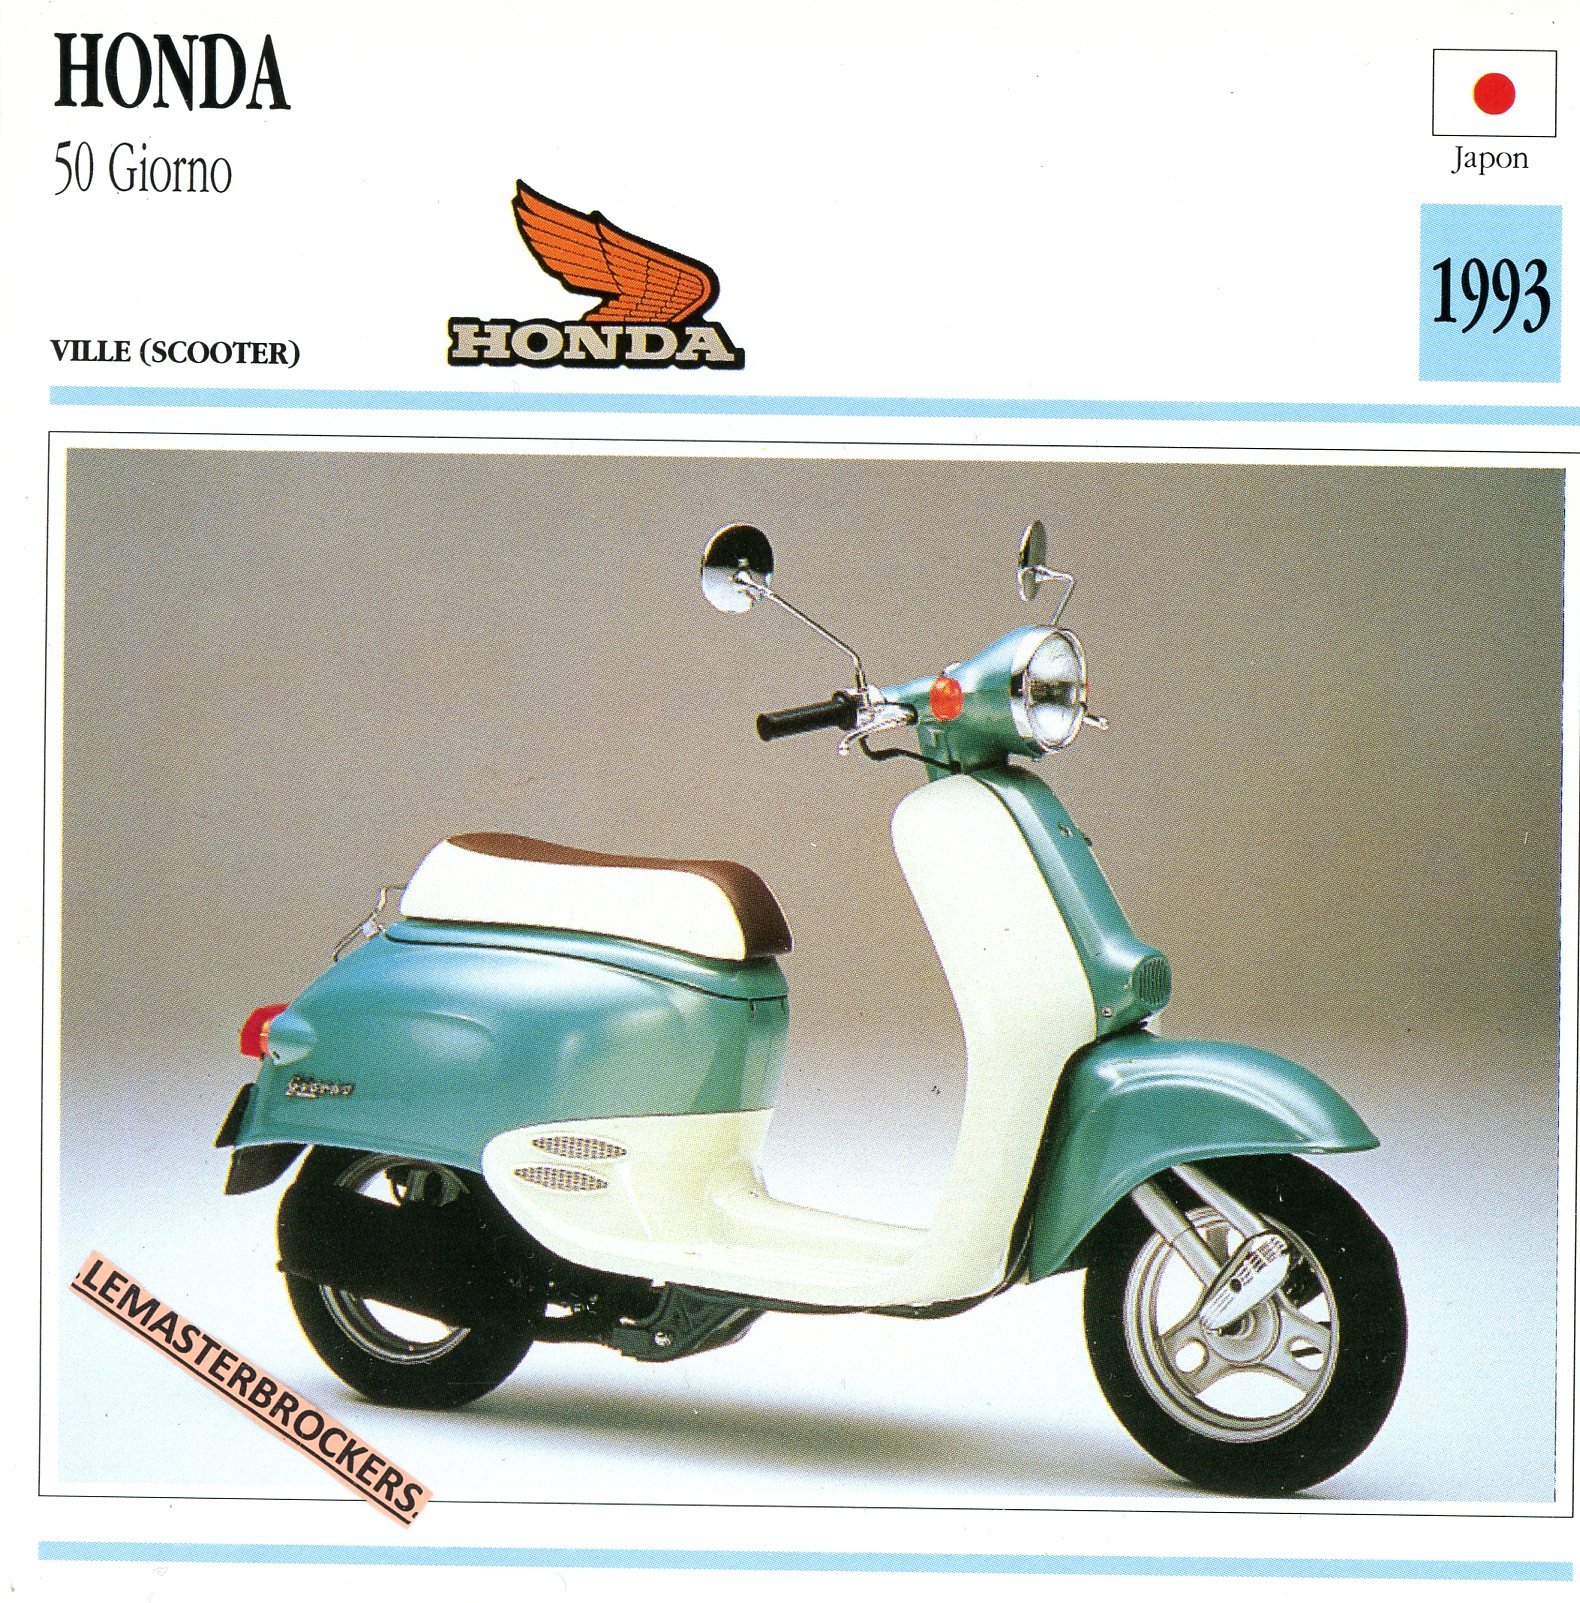 FICHE-SCOOTER-HONDA-50-GIORNO-1993-LEMASTERBROCKERS-CARS-MOTORCYCLE